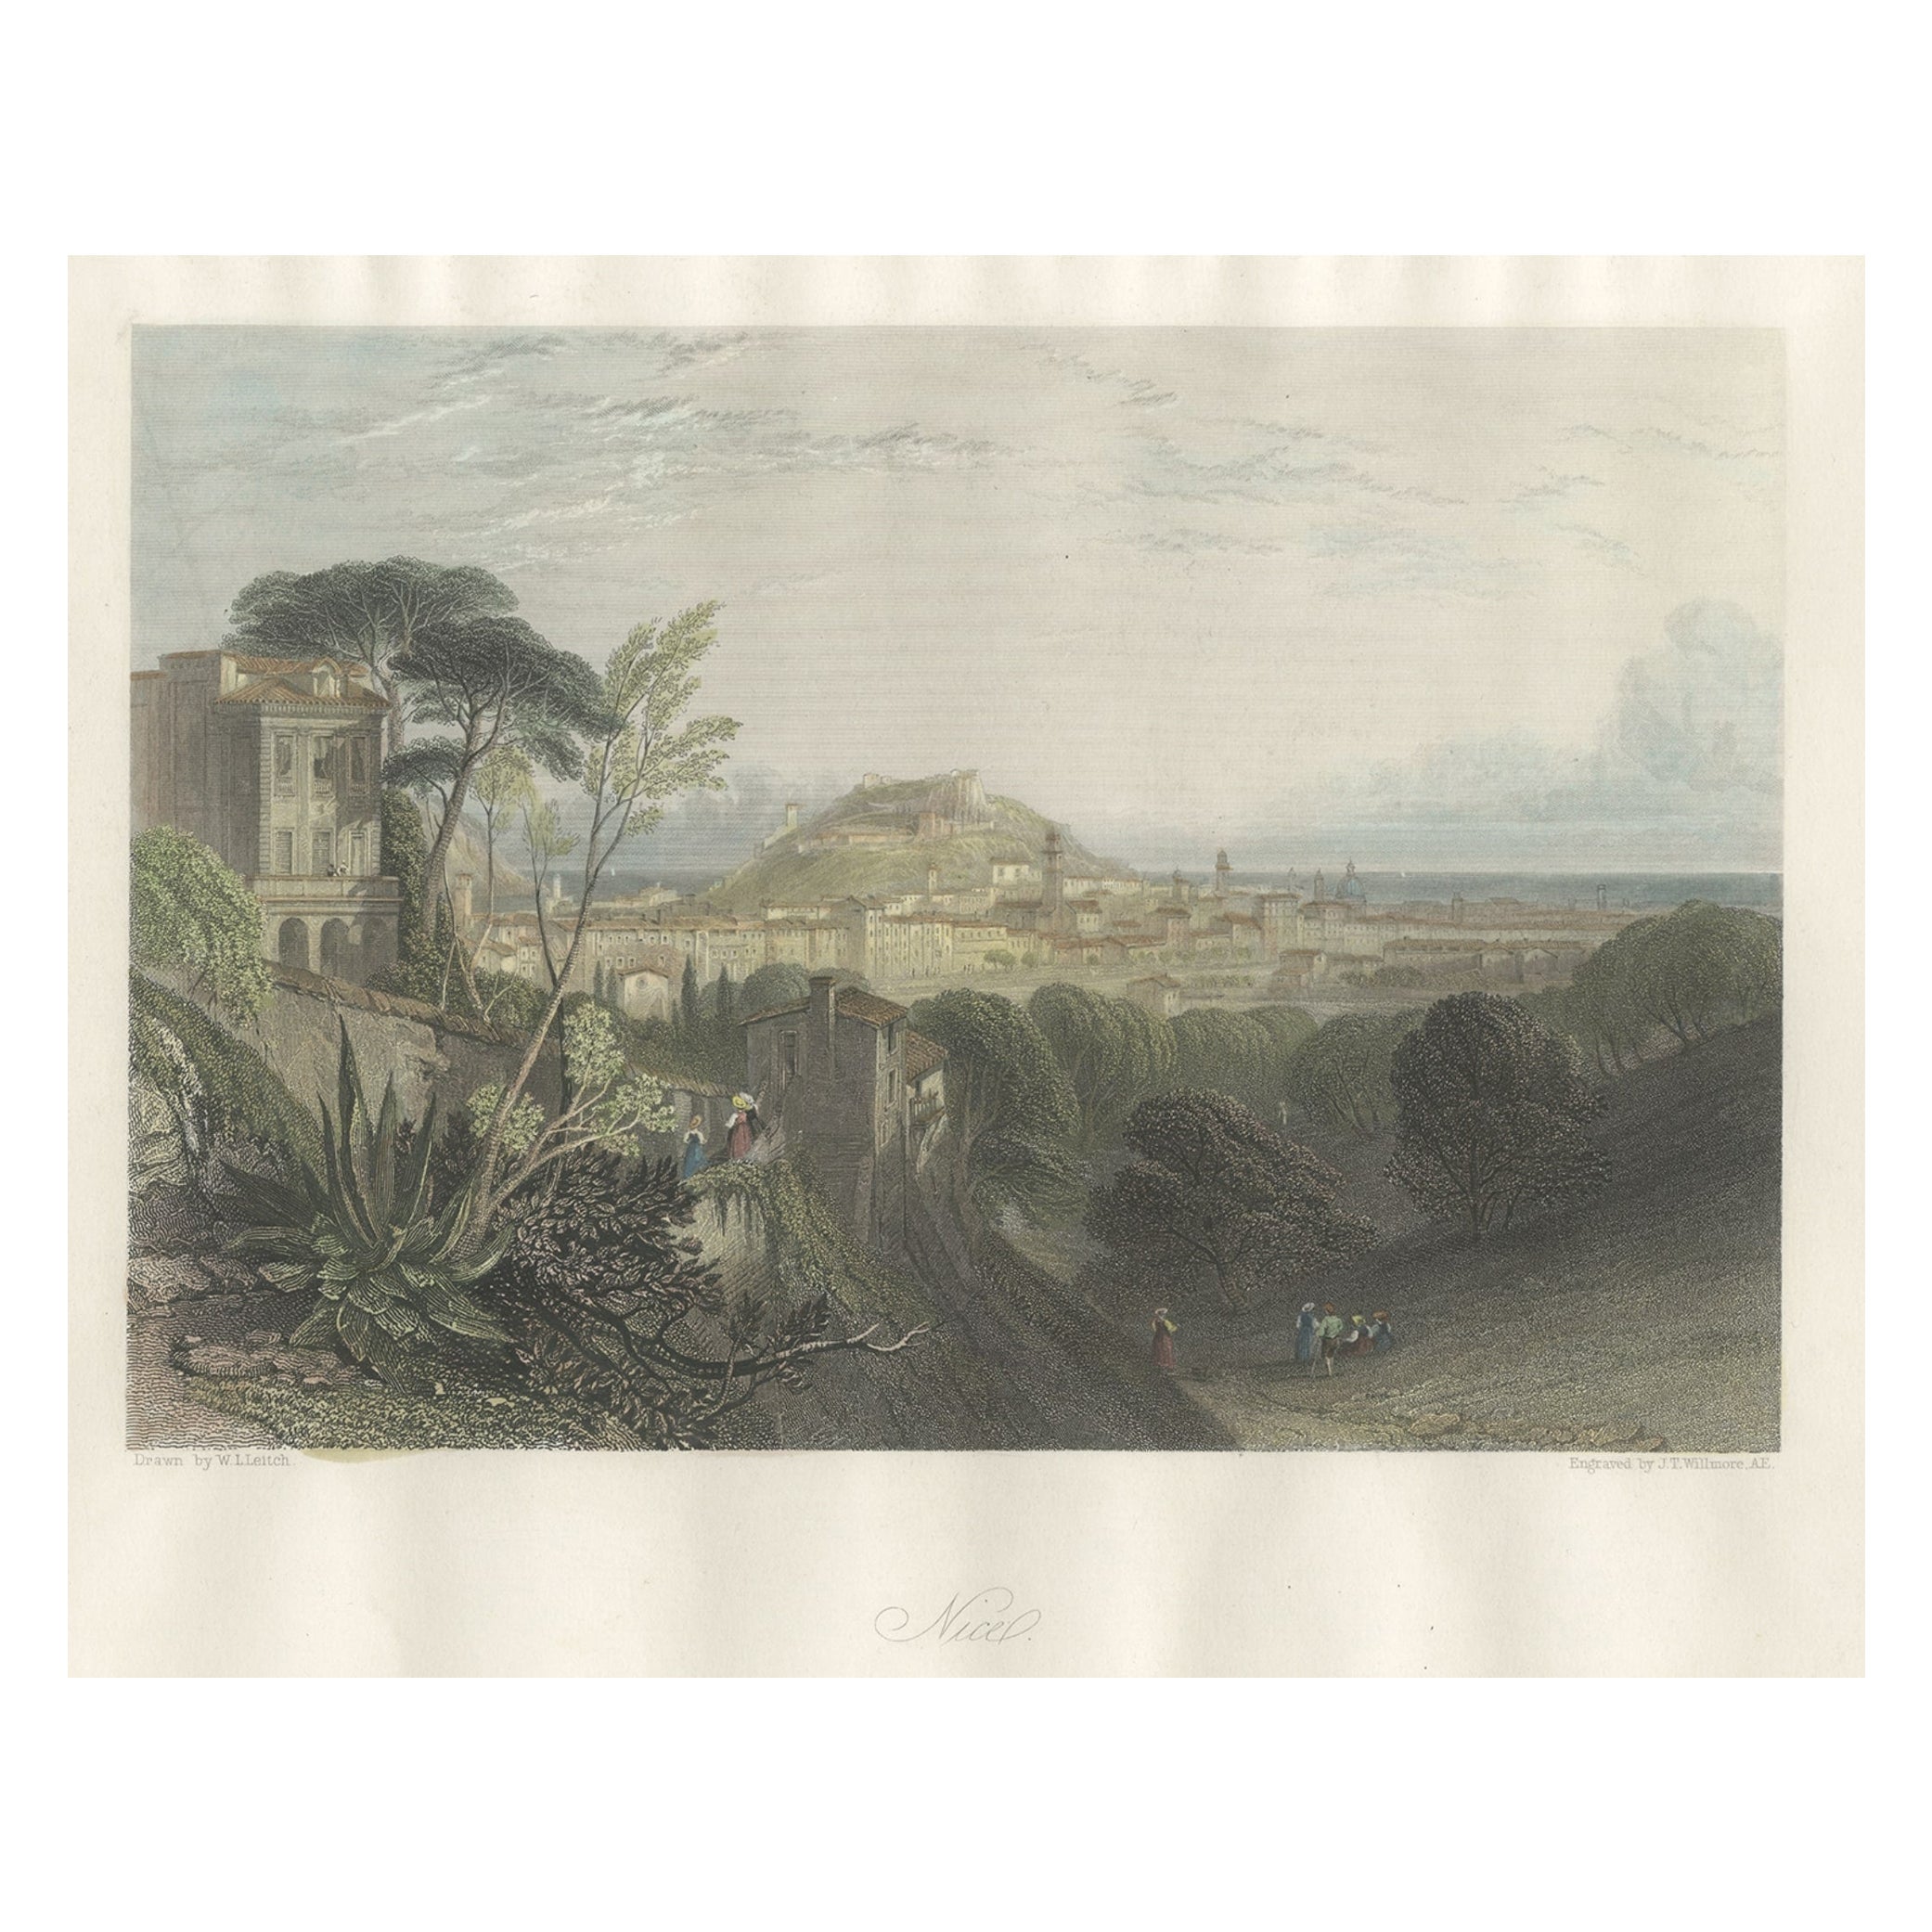 Antique Handcolored Print of the French City of Nice in France, 1856